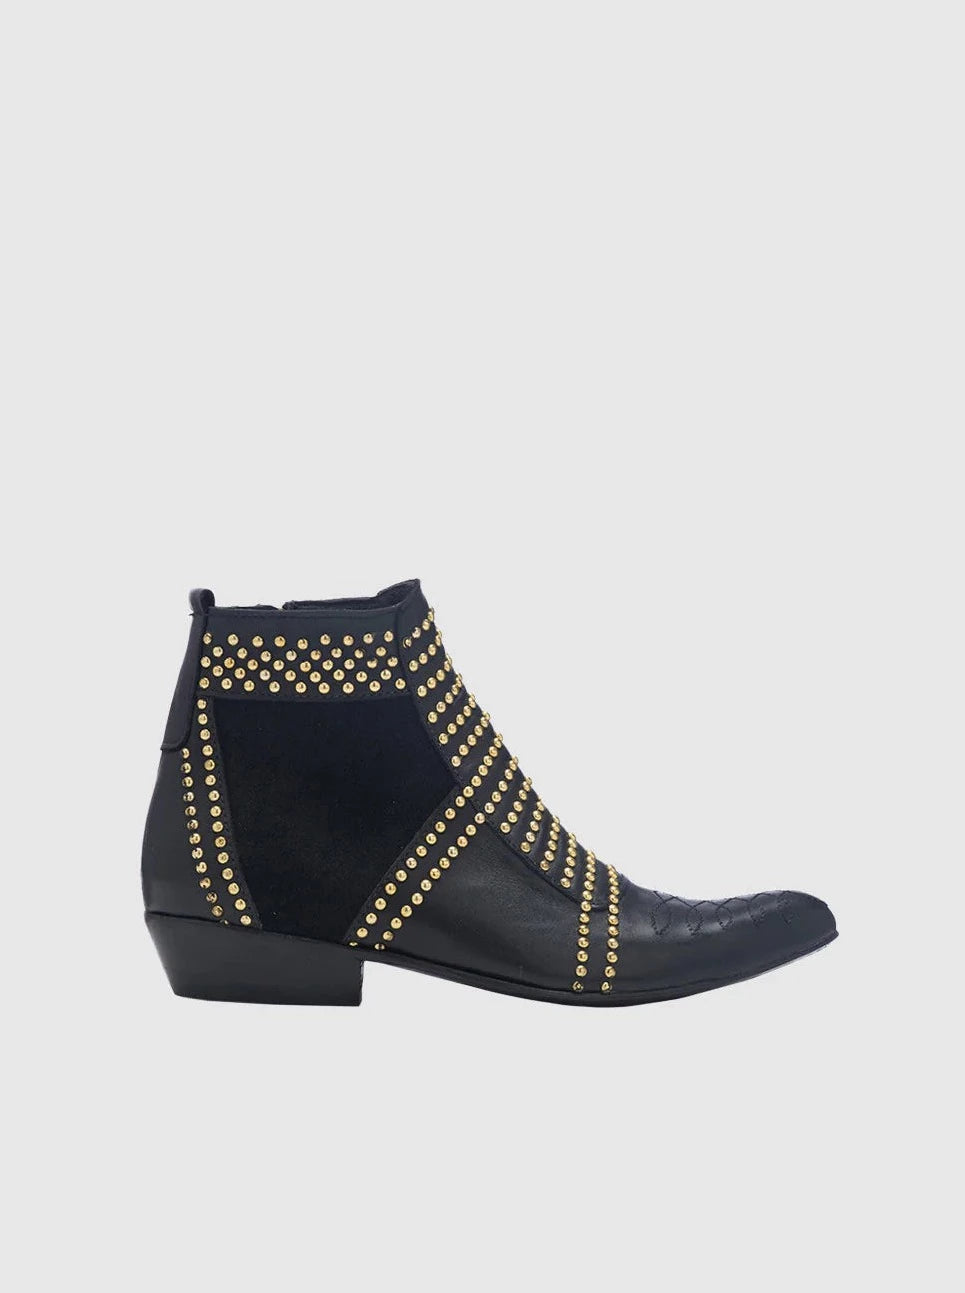 Charlie boots, gold studs